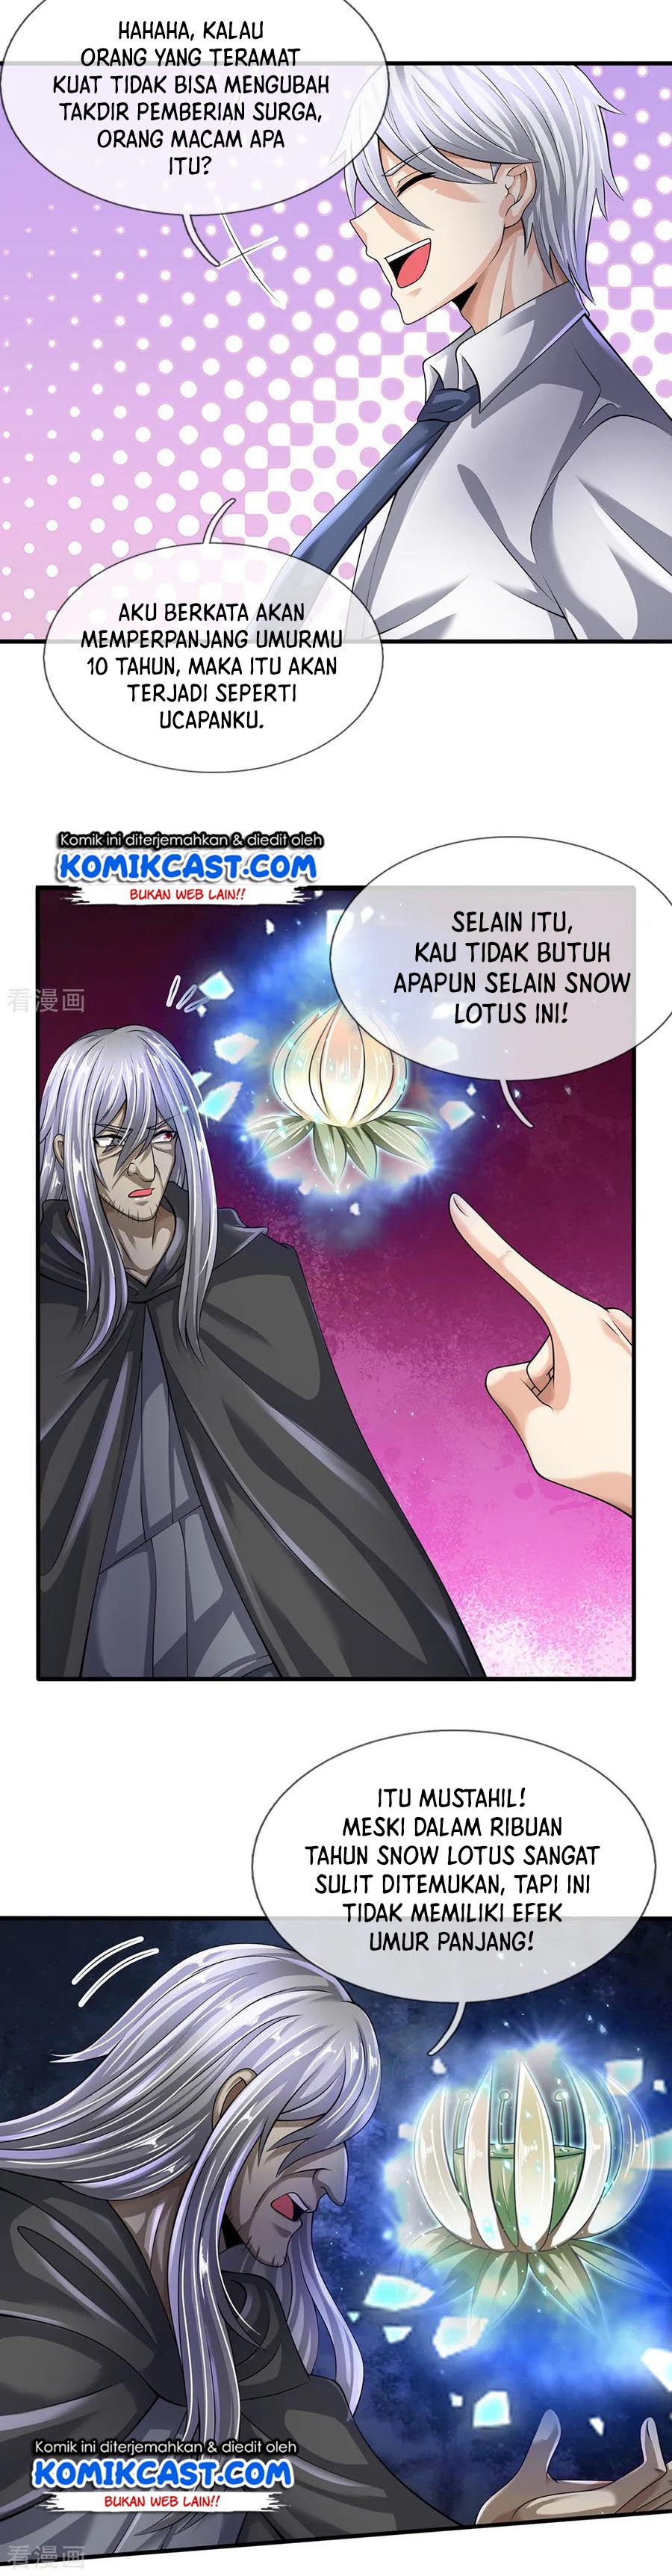 City of Heaven TimeStamp Chapter 138